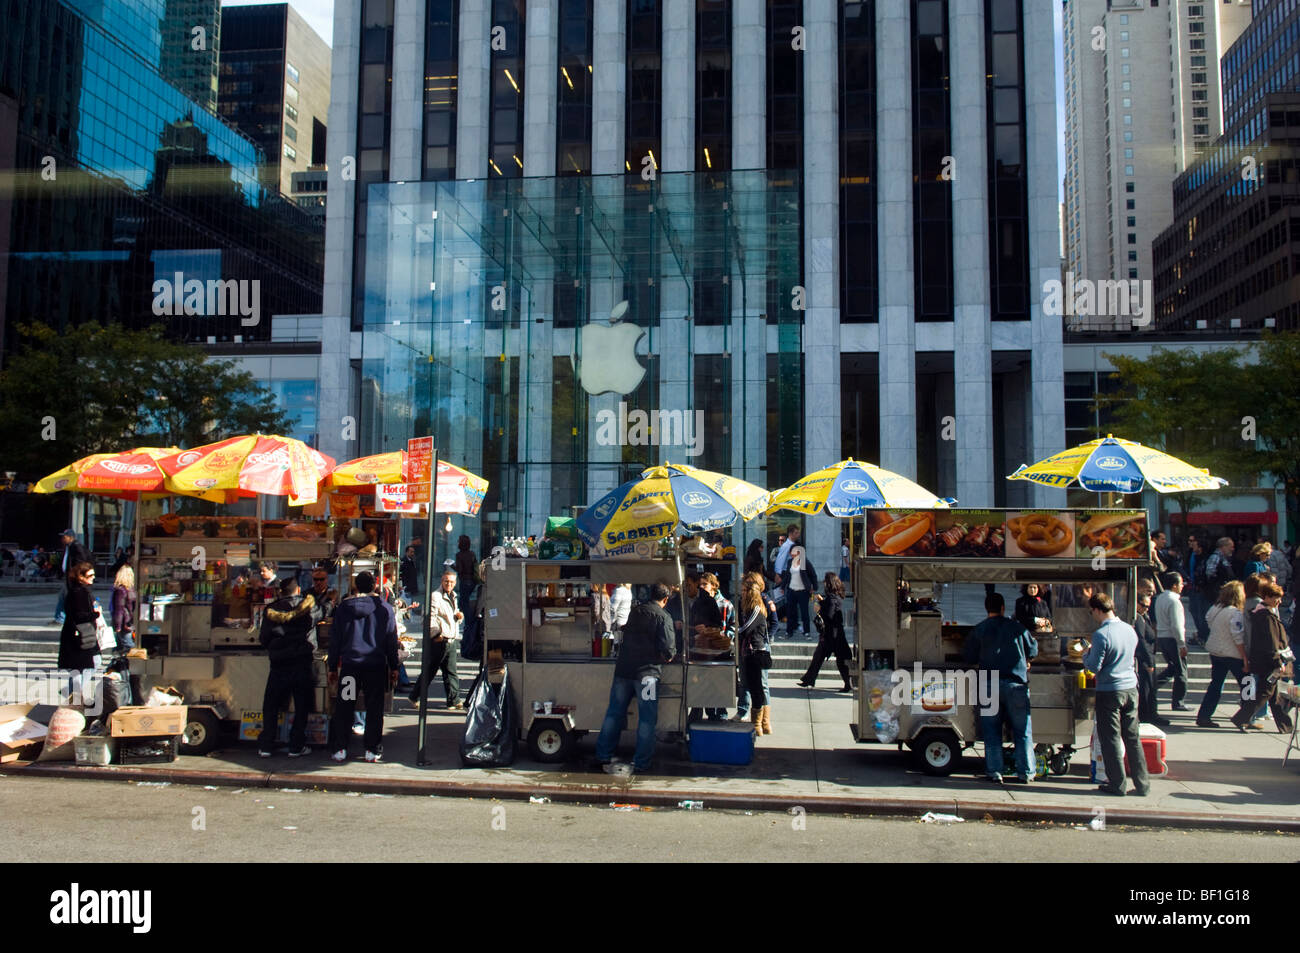 Hot dog vendors line up in front of the midtown Apple Store at the General Motors Building in midtown in New York Stock Photo